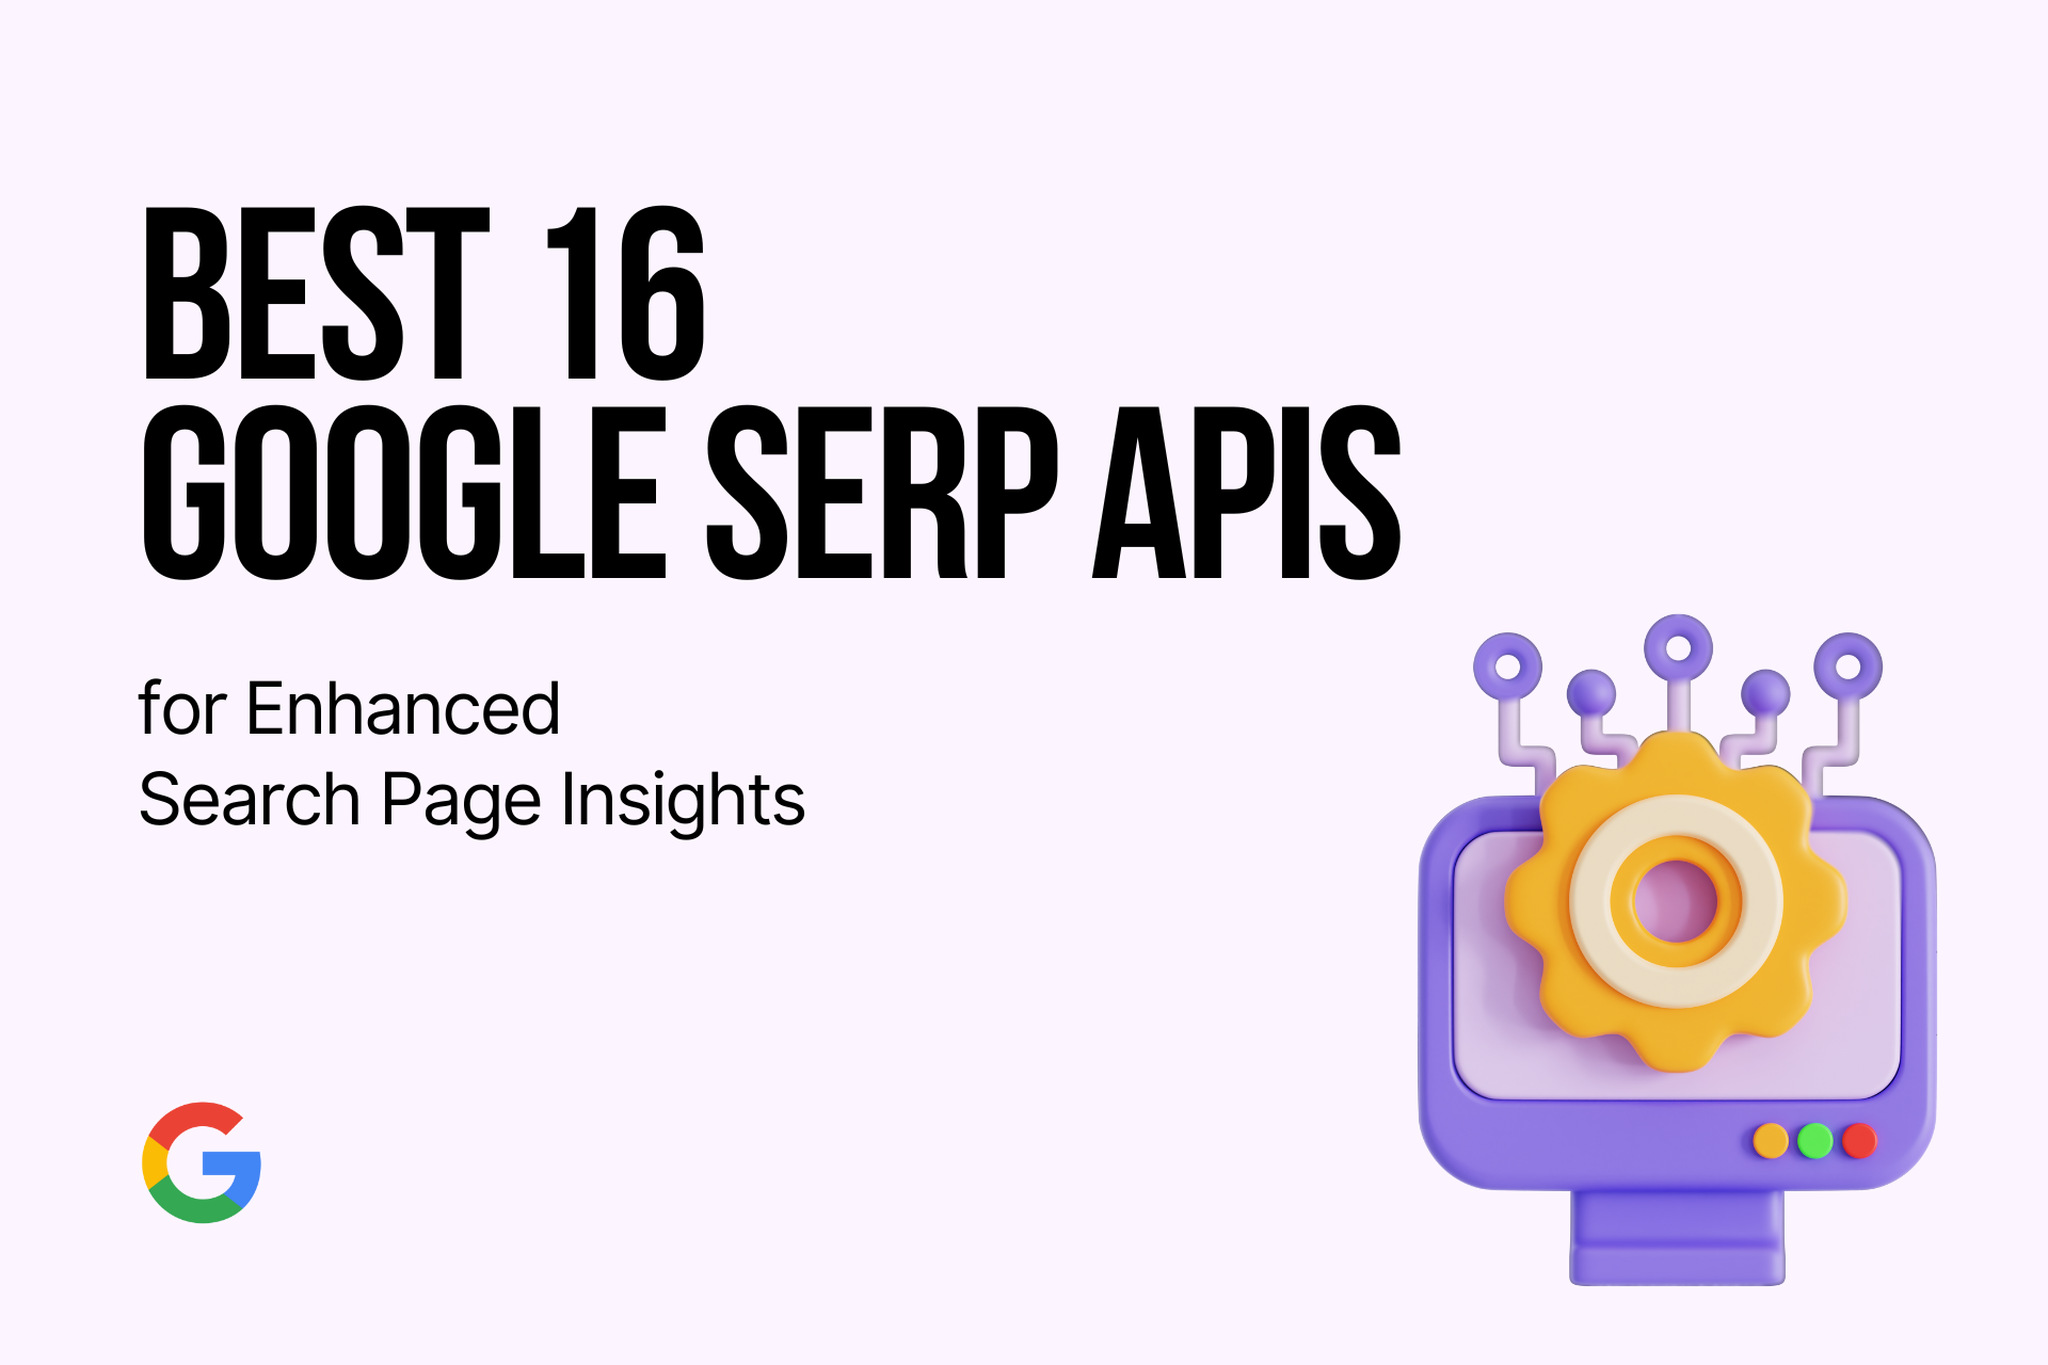 Best 16 Google SERP APIs for Enhanced Search Page Insights